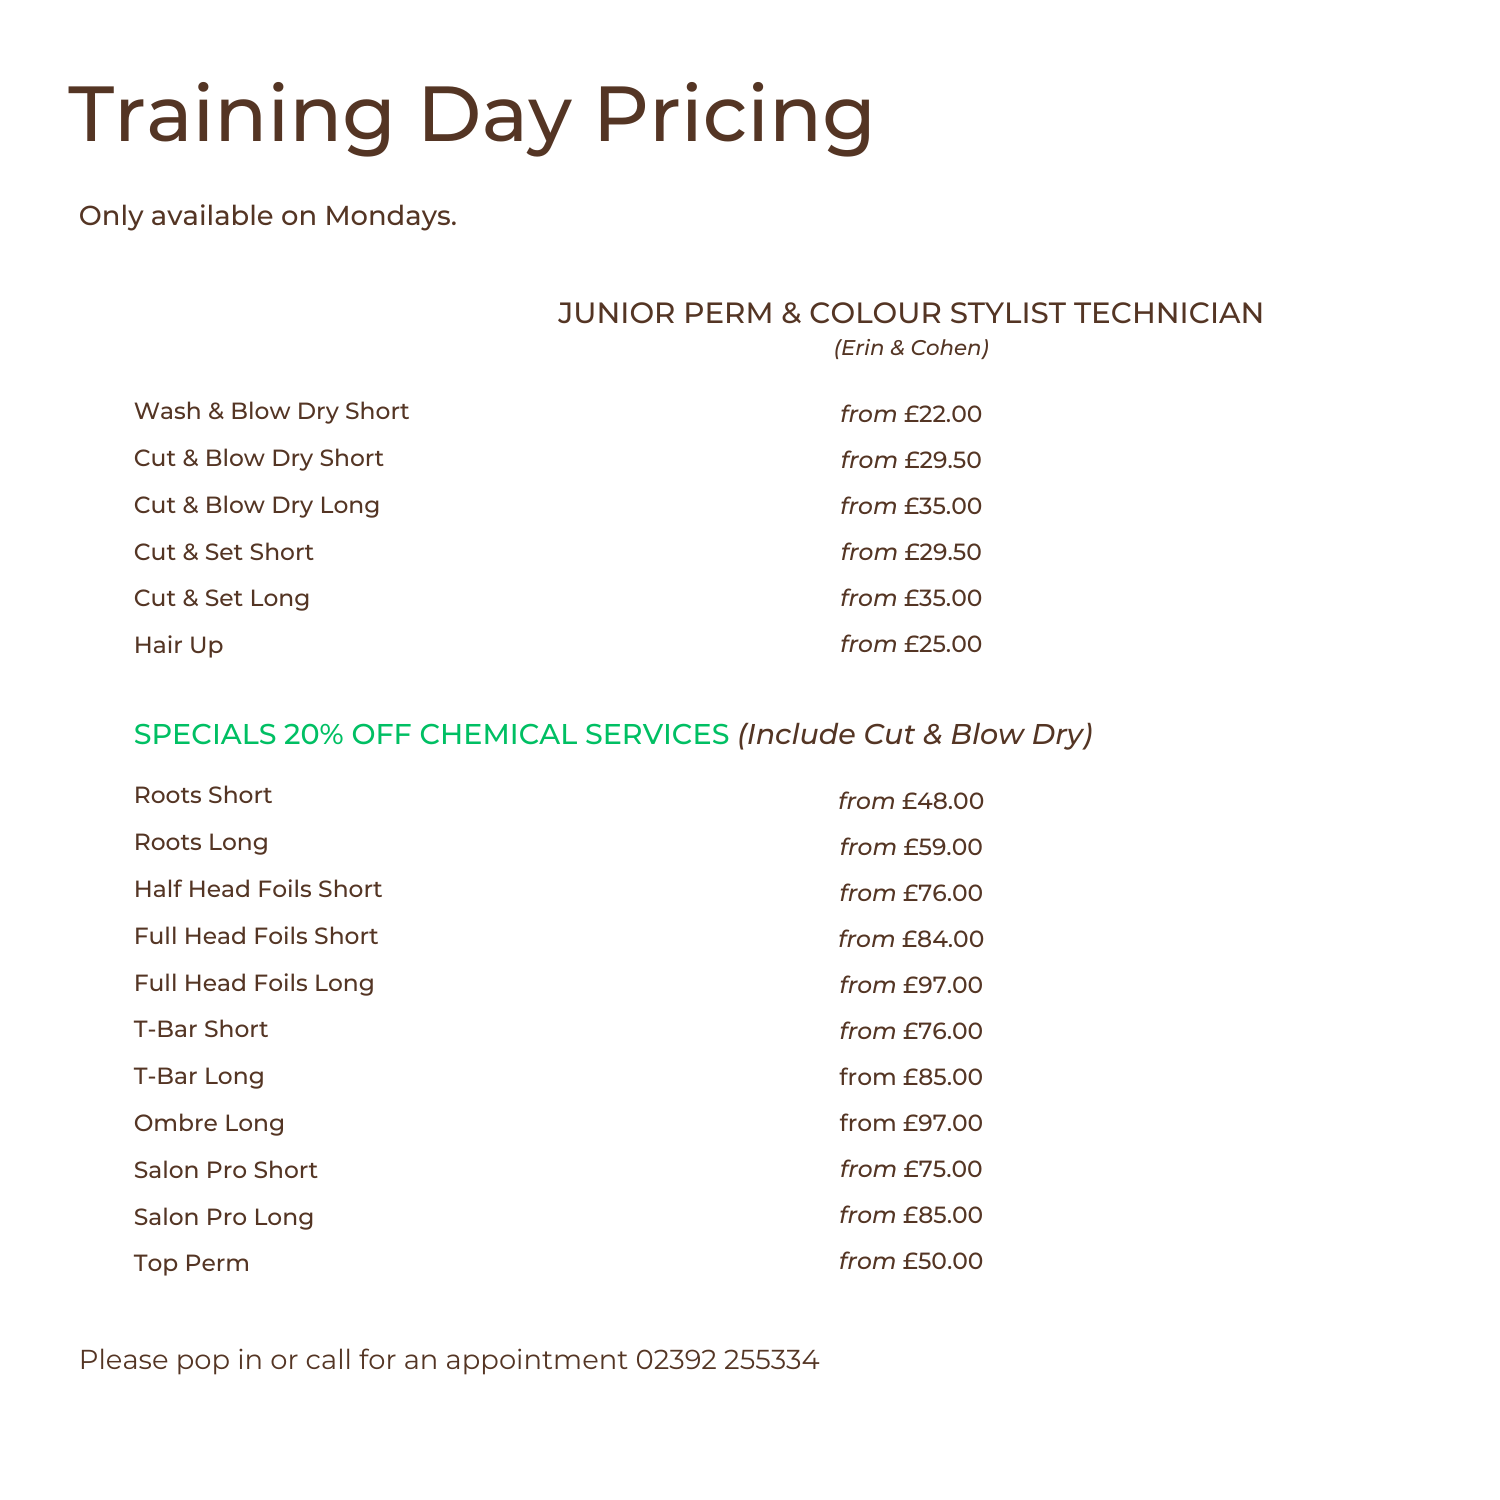 Training Day pricing at Sassy Hair, Denmead